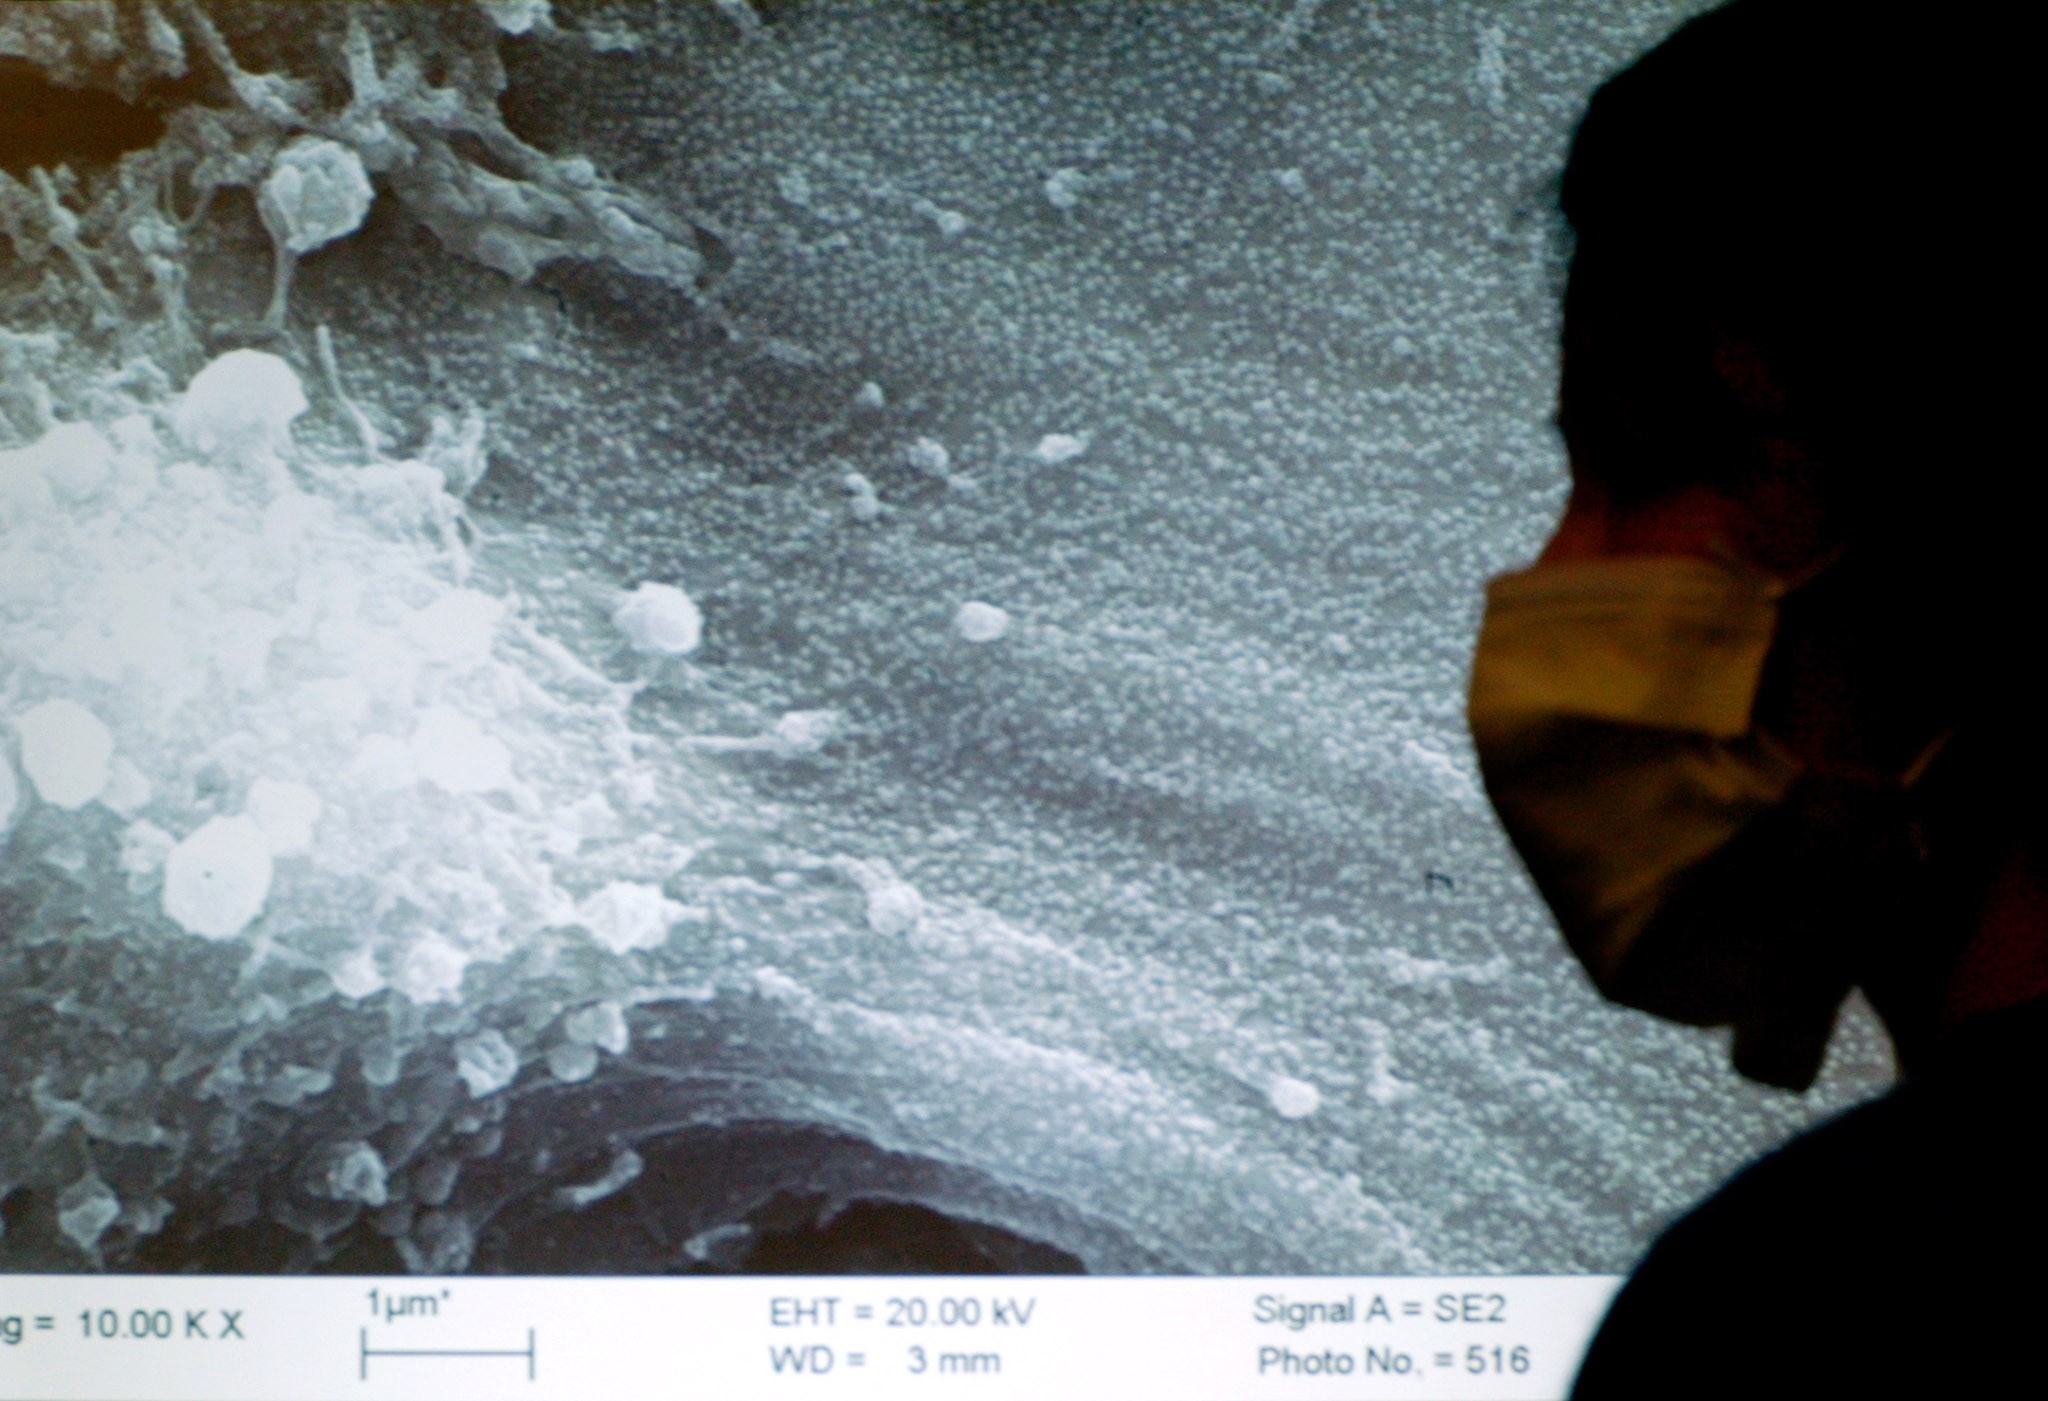 A reporter sits in front a projected image showing Sars-infected cells inspected under a microscope during a news conference in Hong Kong in 2003. The new coronavirus is similar to the one that caused Sars, but they are not identical. Photo: Reuters